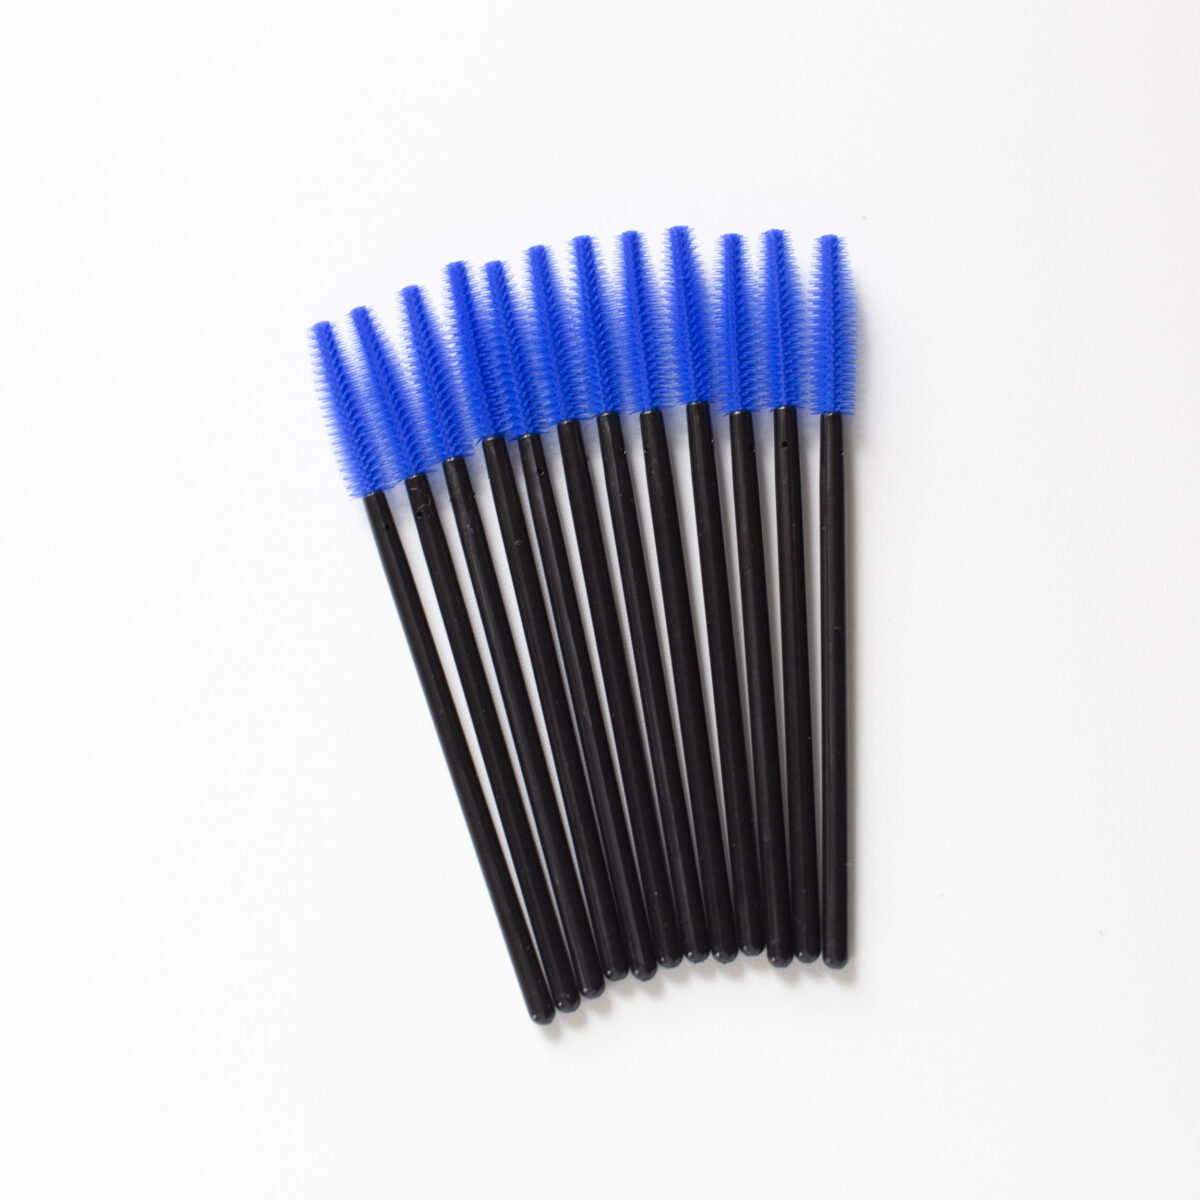 Silicon Disposable Mascara Brushes (Pack of 50)